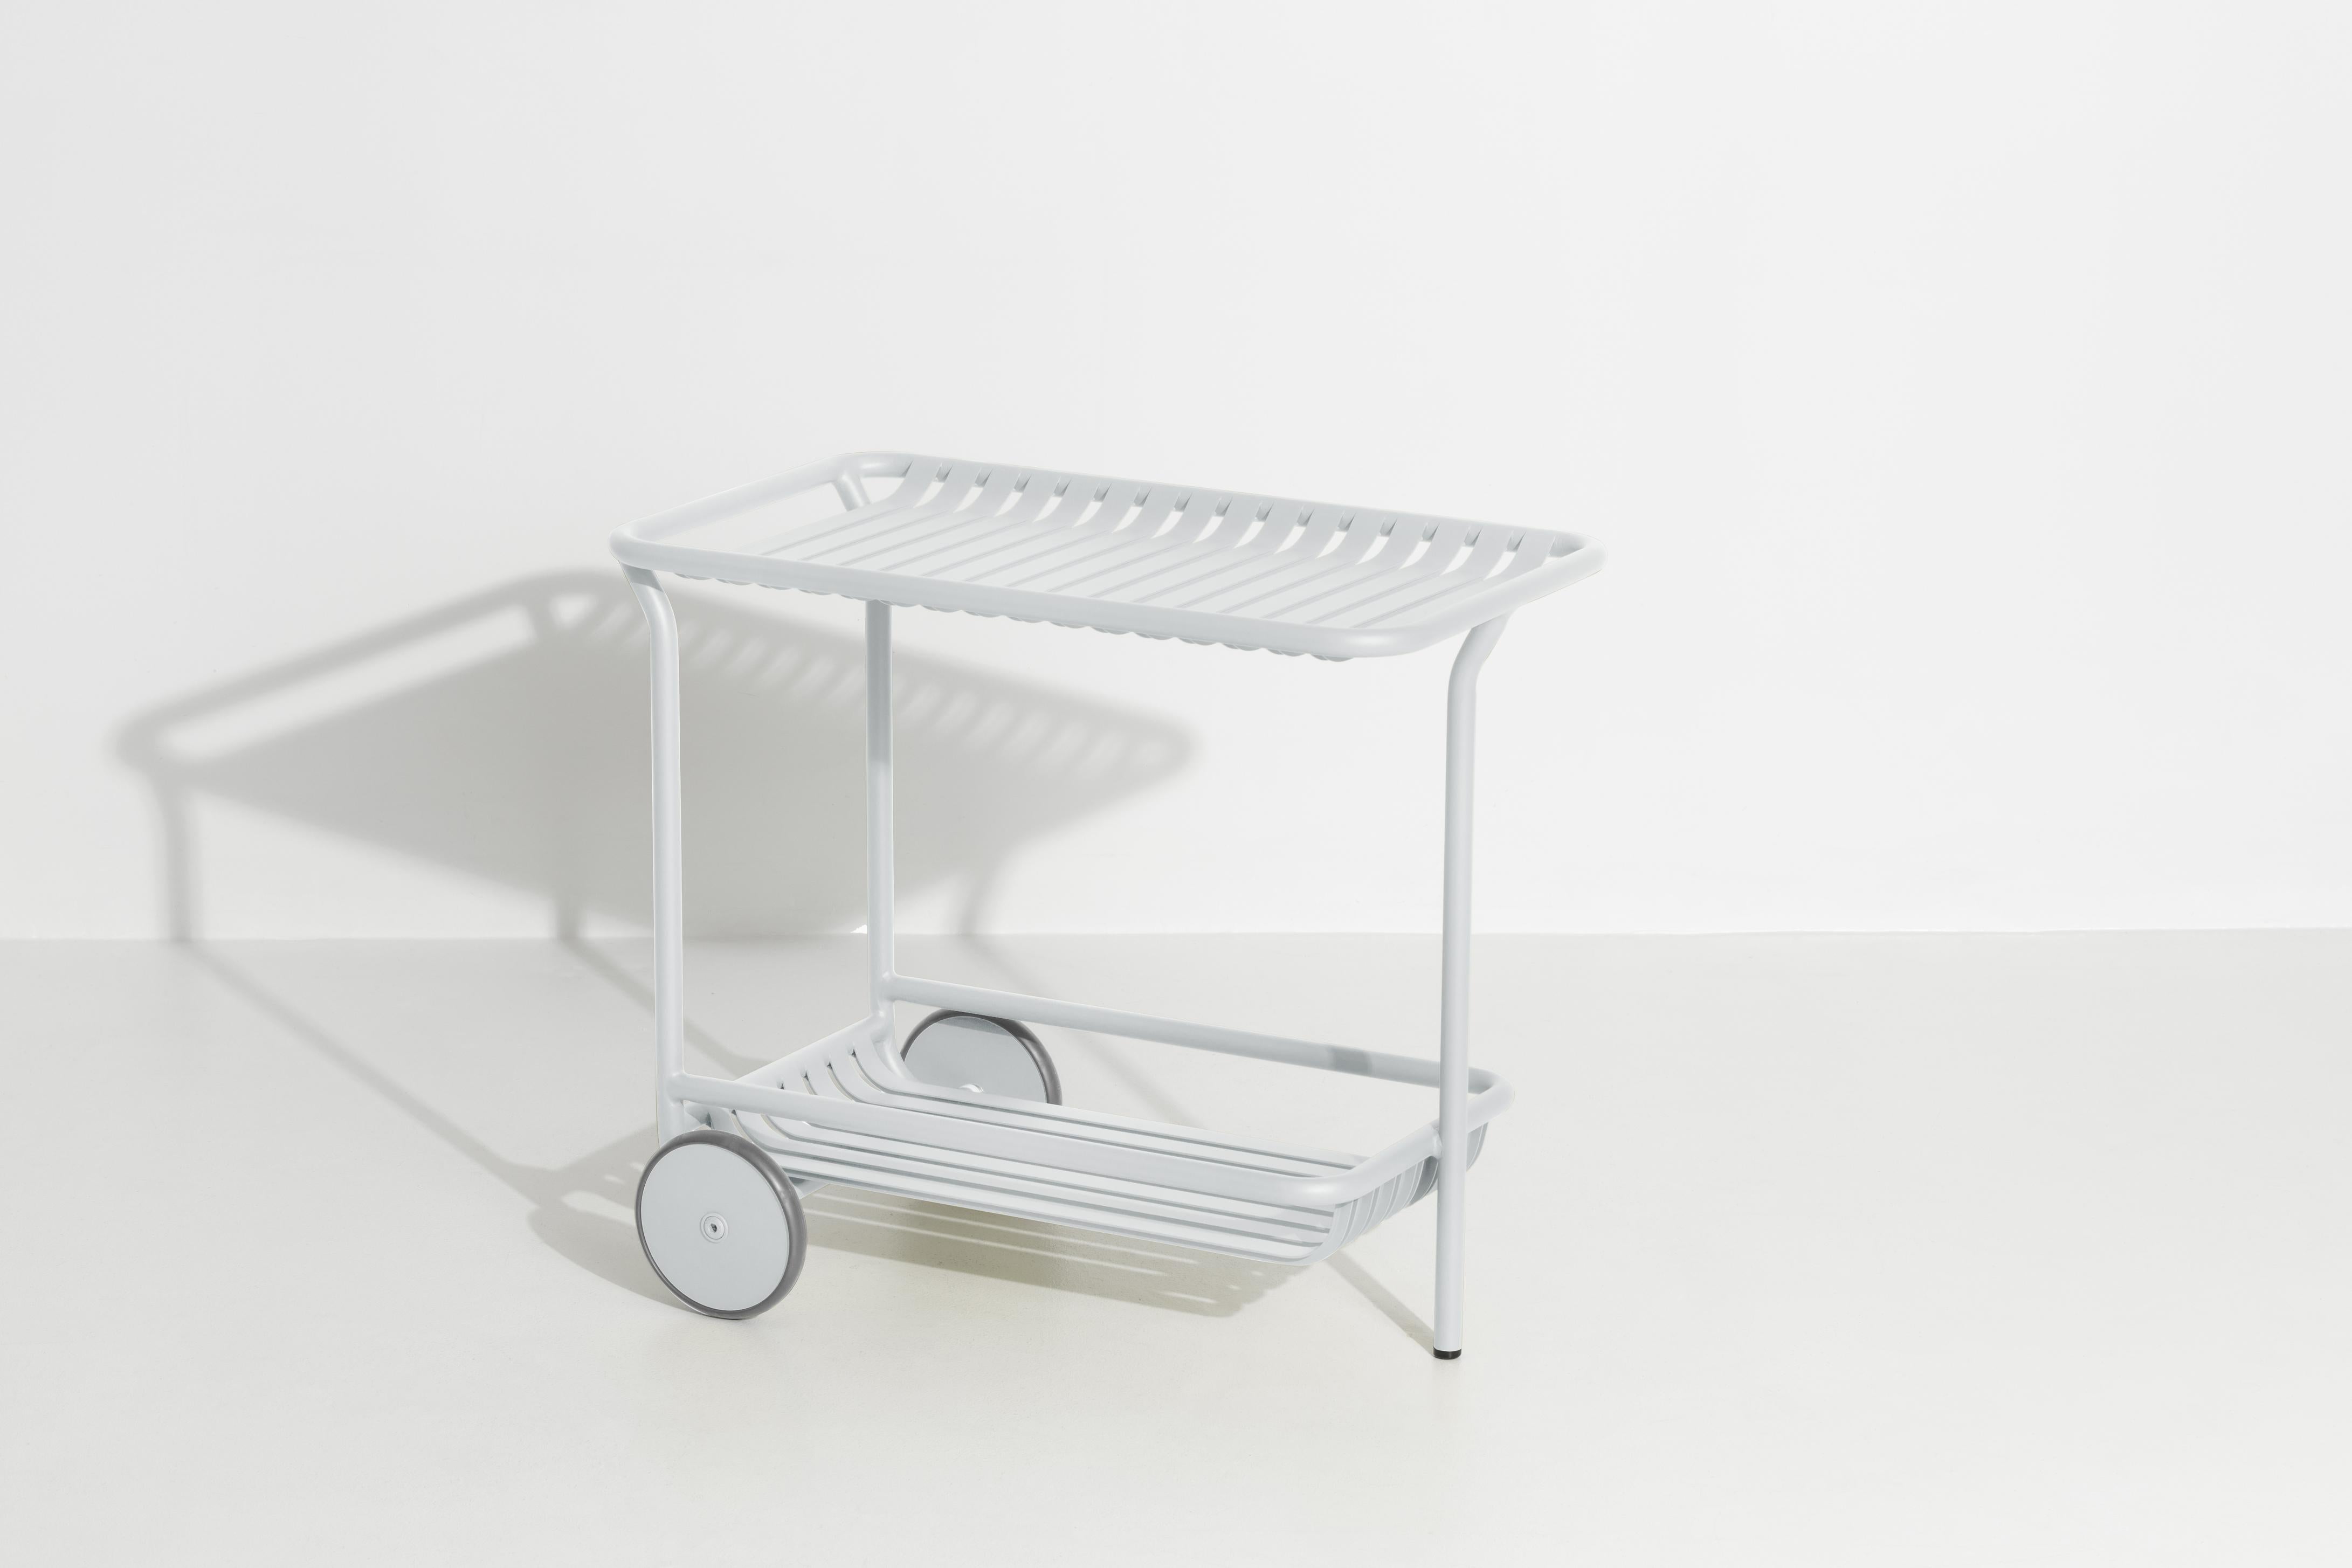 Petite Friture Week-End Trolley in Pearl Grey Aluminium by Studio BrichetZiegler, 2017

The week-end collection is a full range of outdoor furniture, in aluminium grained epoxy paint, matt finish, that includes 18 functions and 8 colours for the